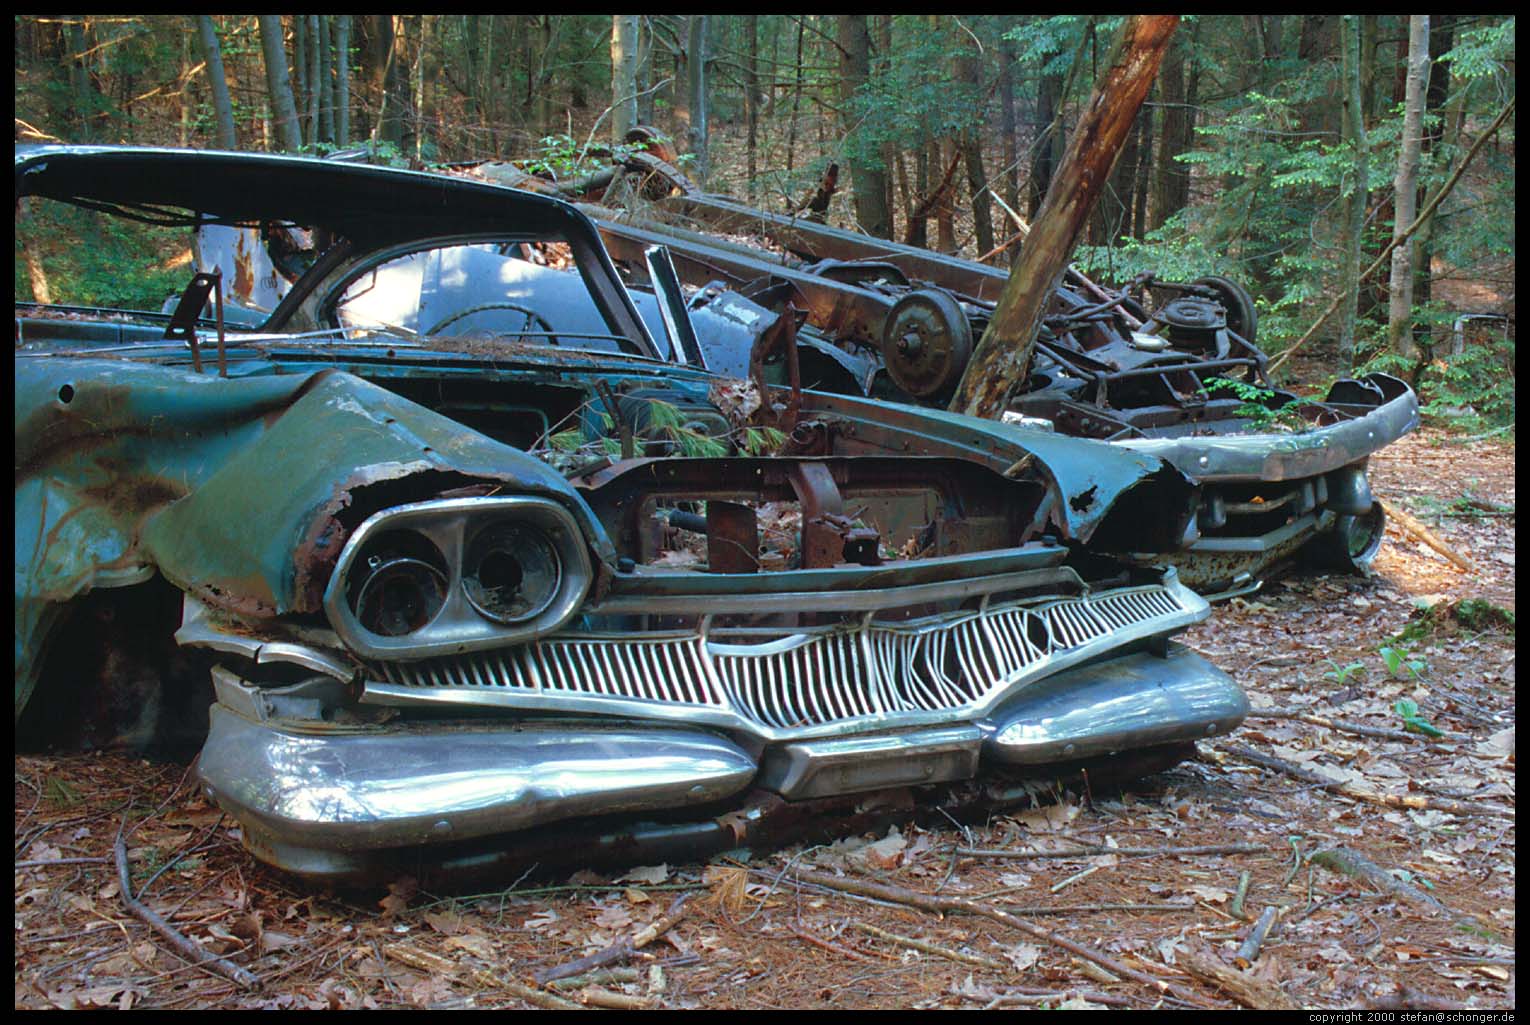 Junk Cars in Forest, Amherst, MA, May 2000